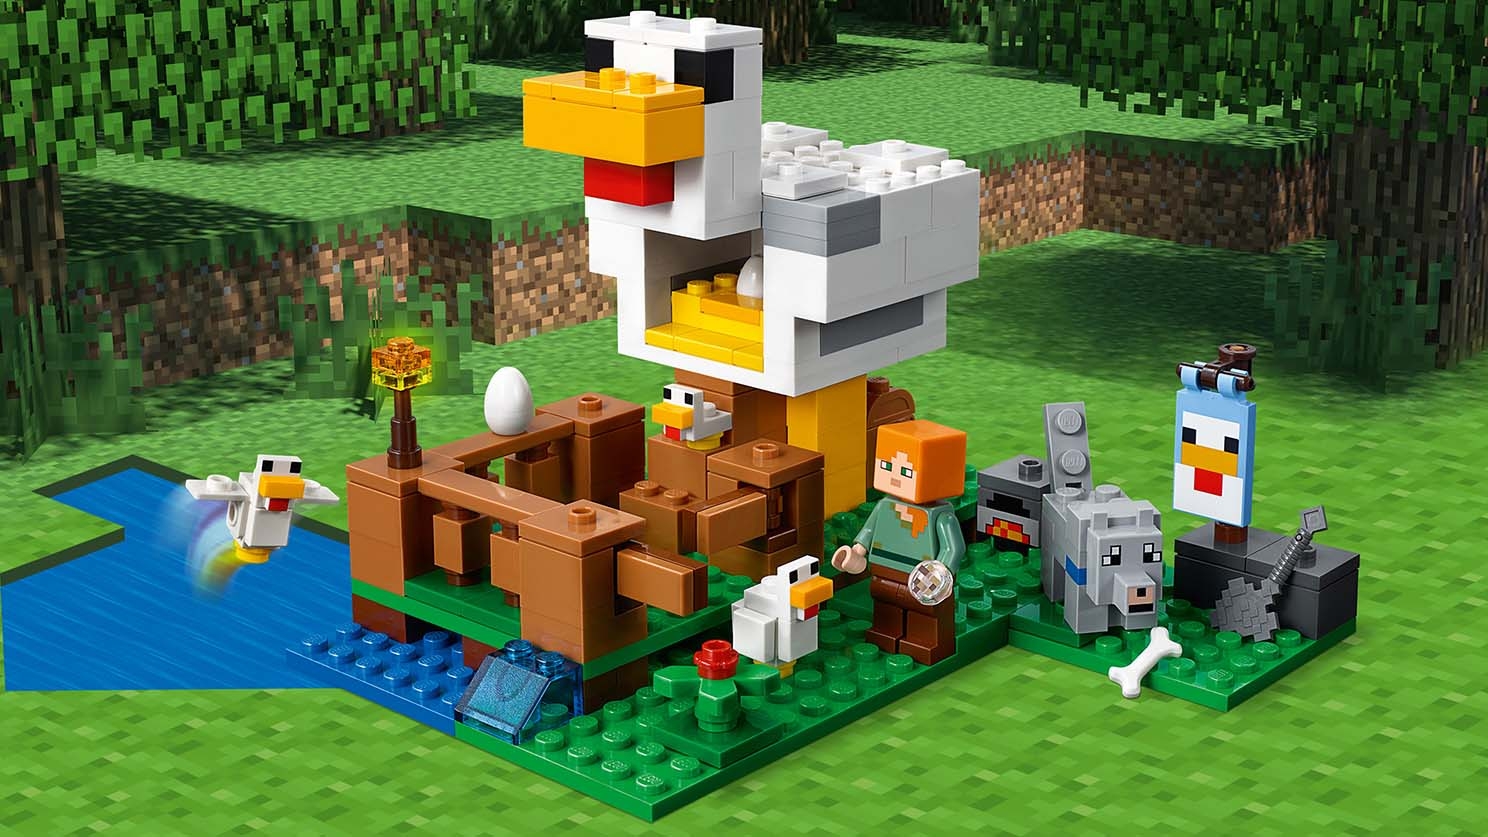 The Chicken Coop 21 - LEGO® Minecraft™ Sets - LEGO.com for kids